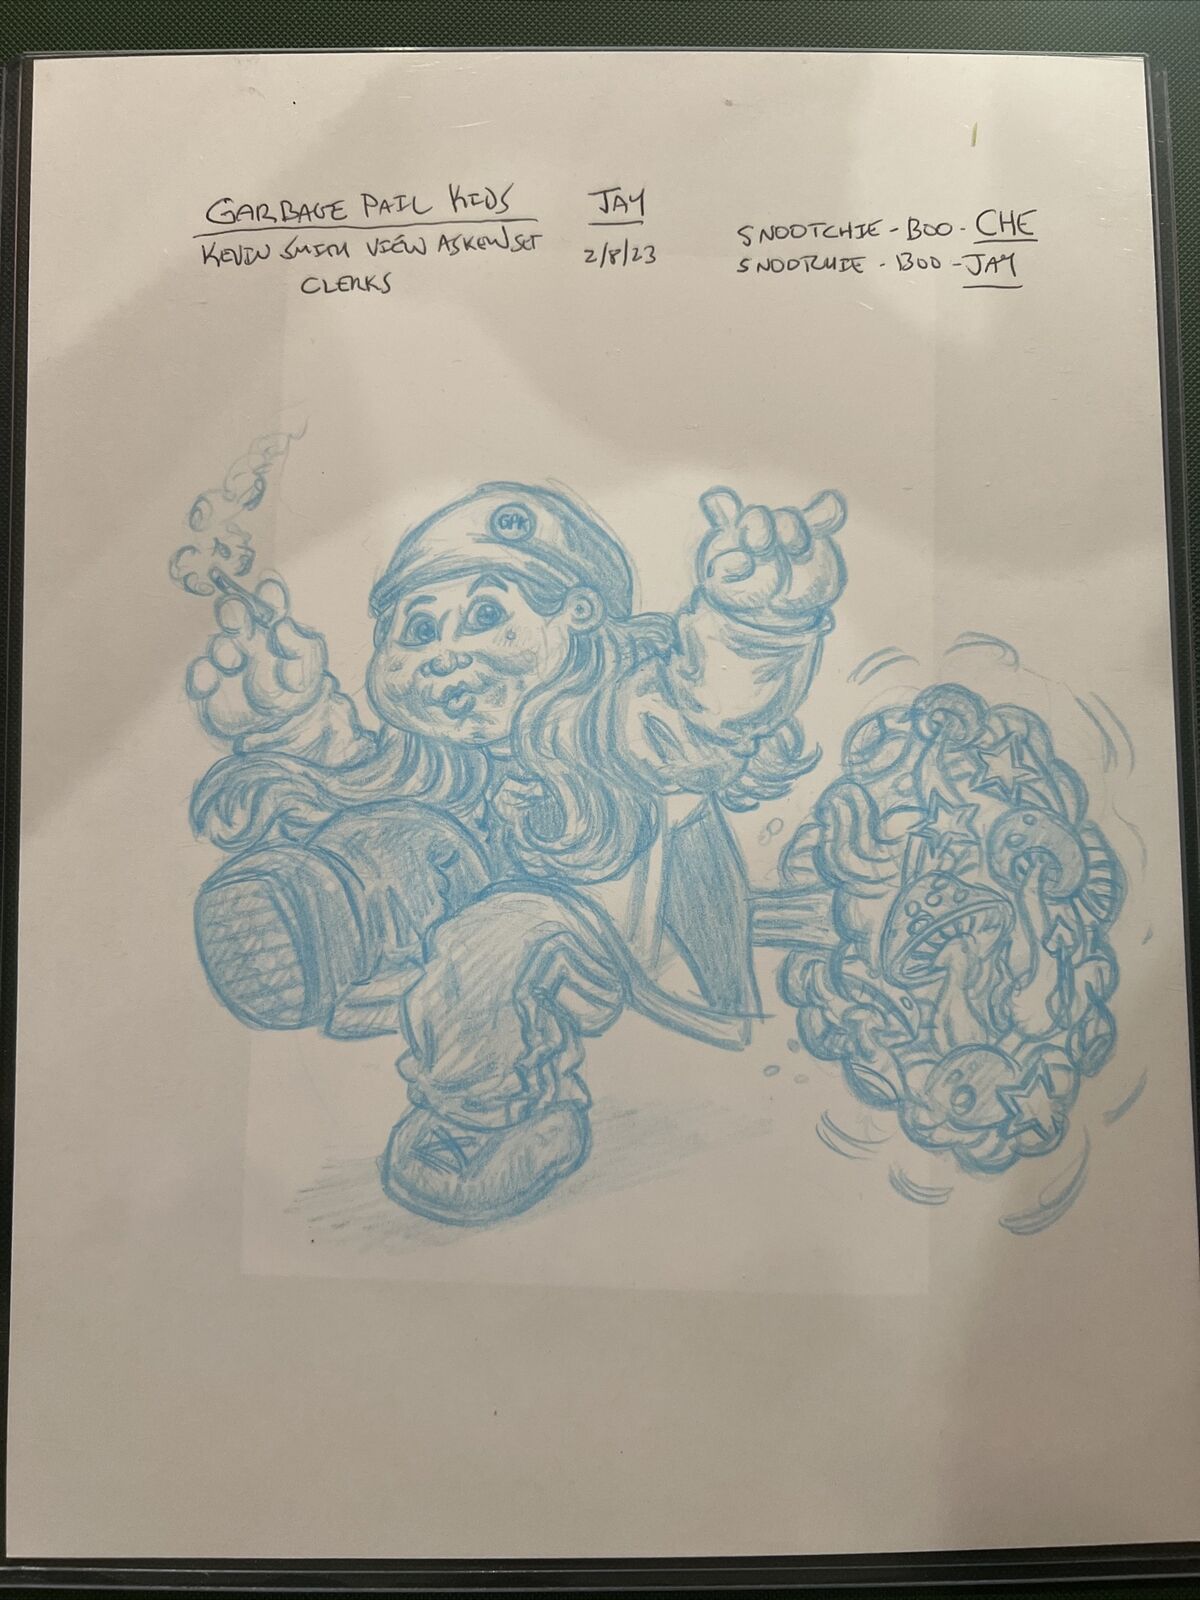 garbage pail kids view askew David Gross Pencil Rough 1 Of 1 Snootchie Boo Jay